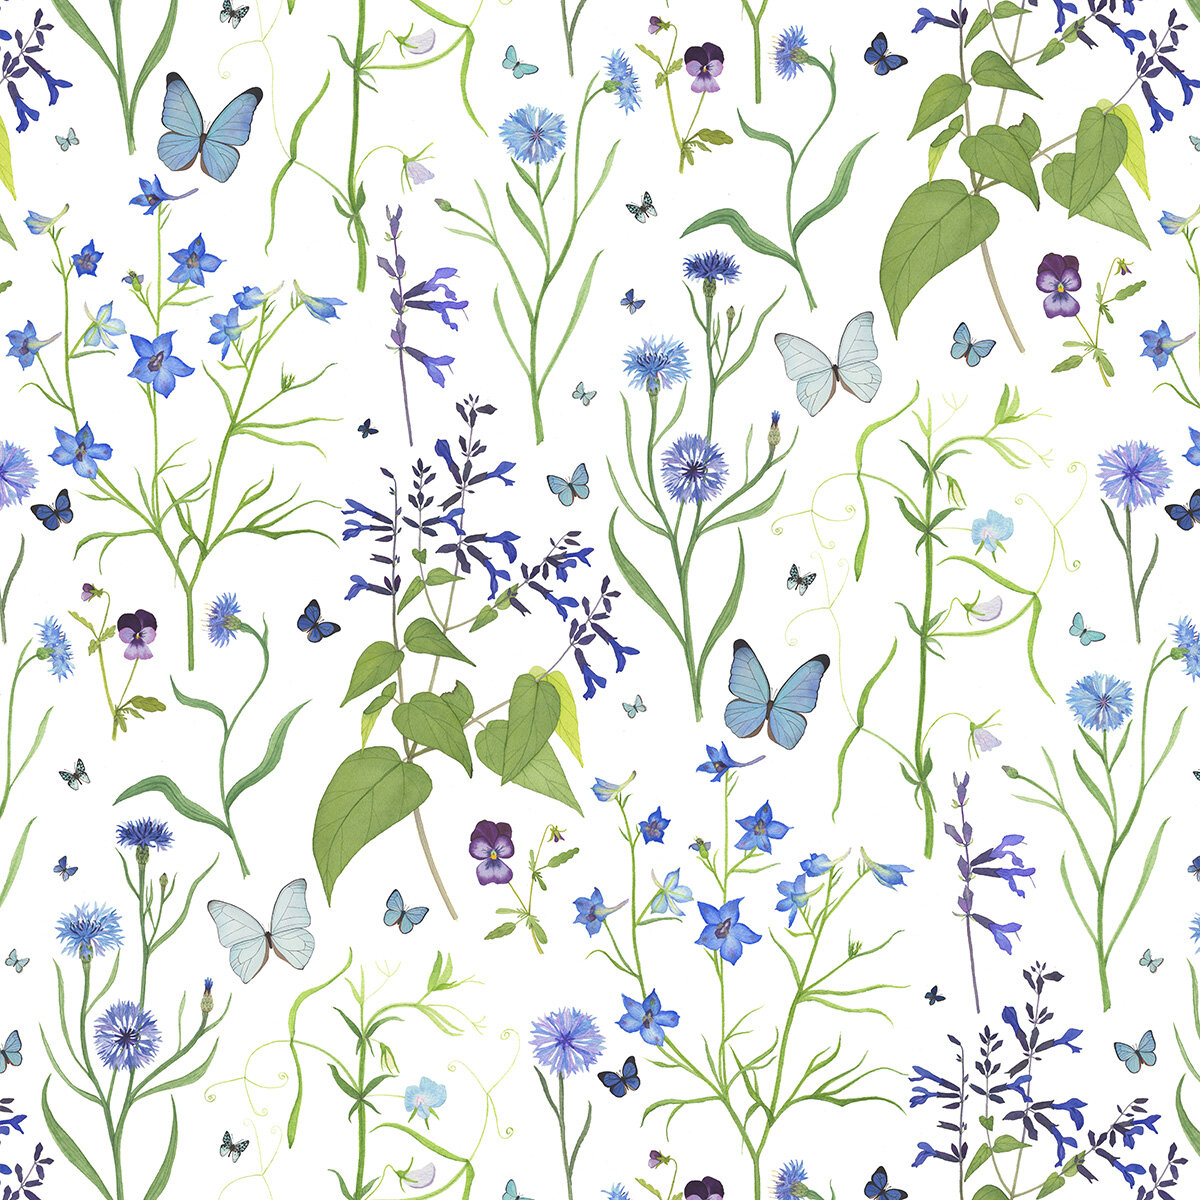 Watercolor Blue Flowers and Butterflies Fabric Design